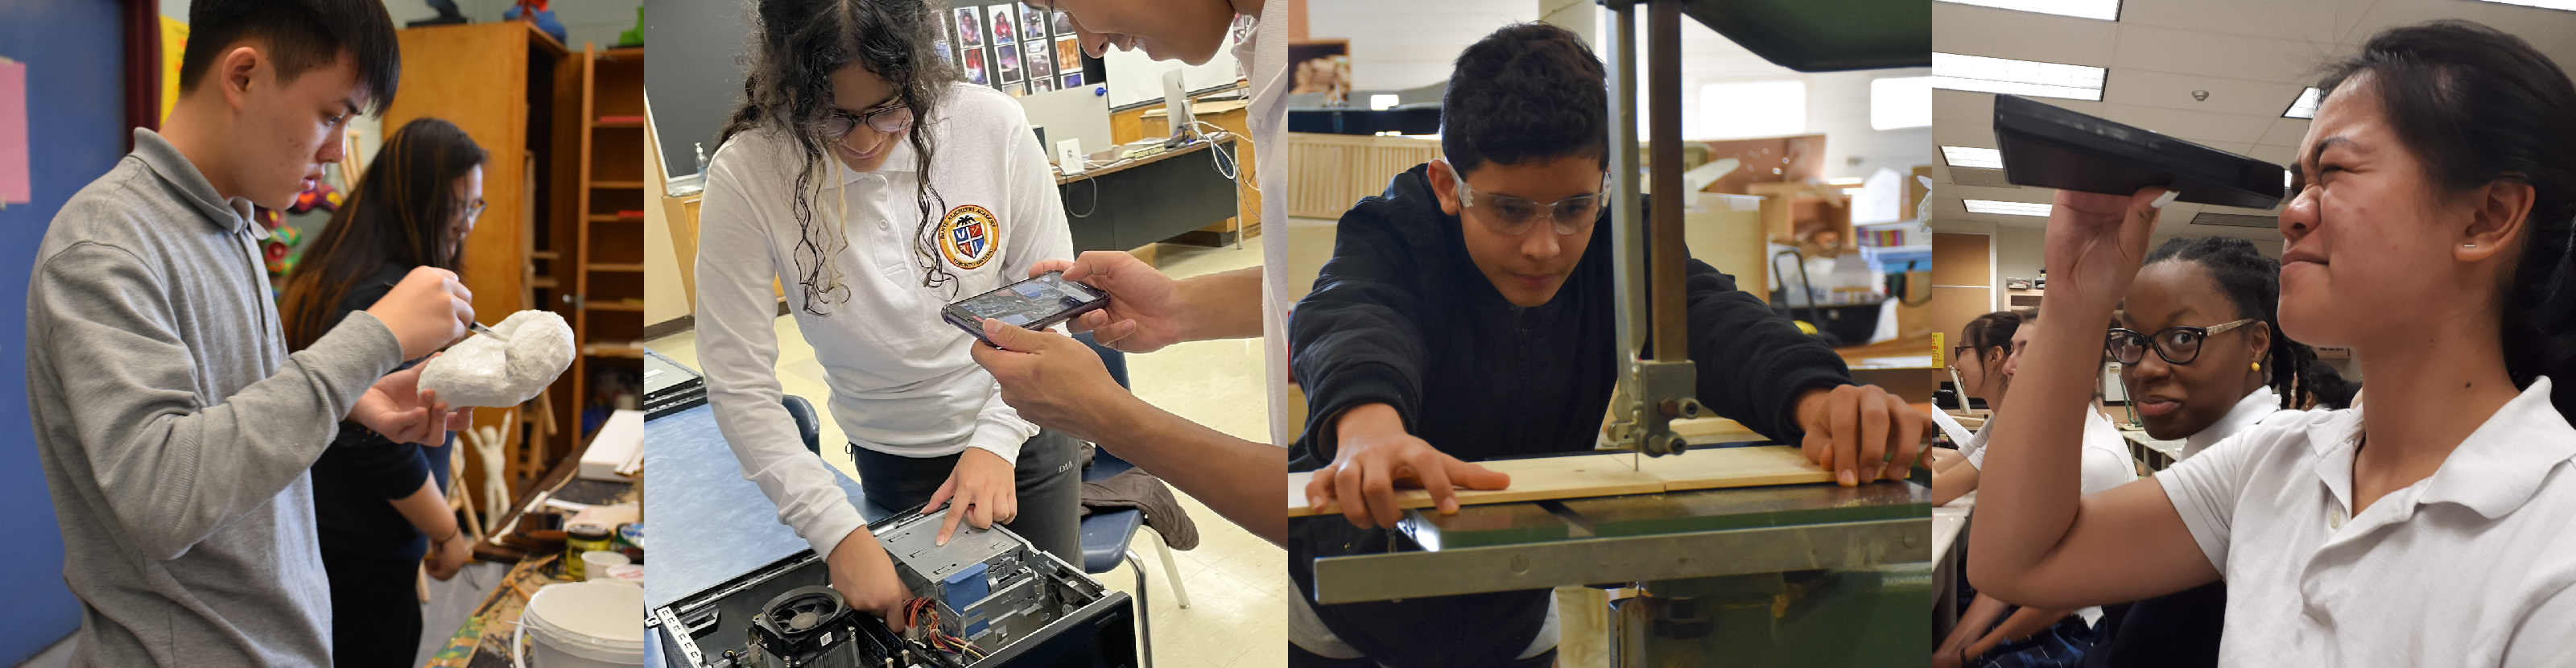 Photo of four students in uniform sculpting, examining a torndown CPU, working in the wood shop, and looking through a device in class.